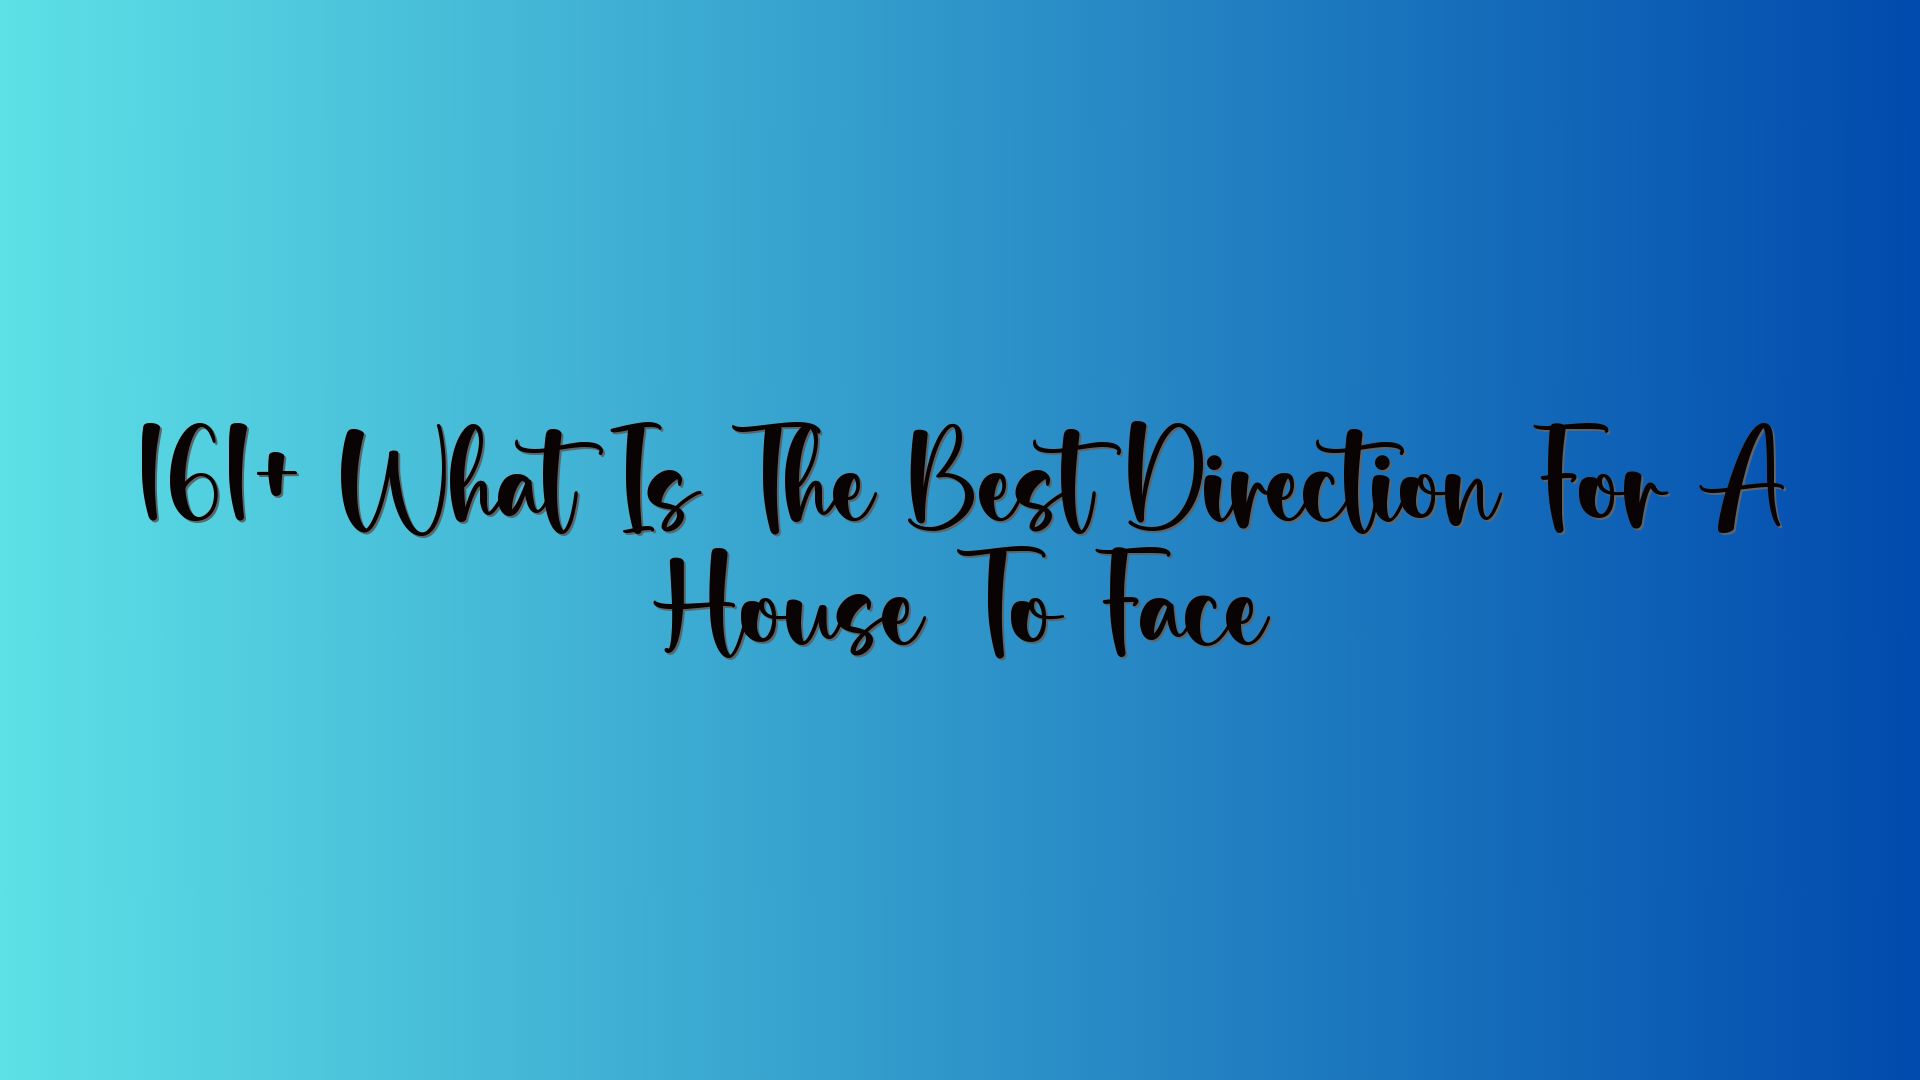 161+ What Is The Best Direction For A House To Face